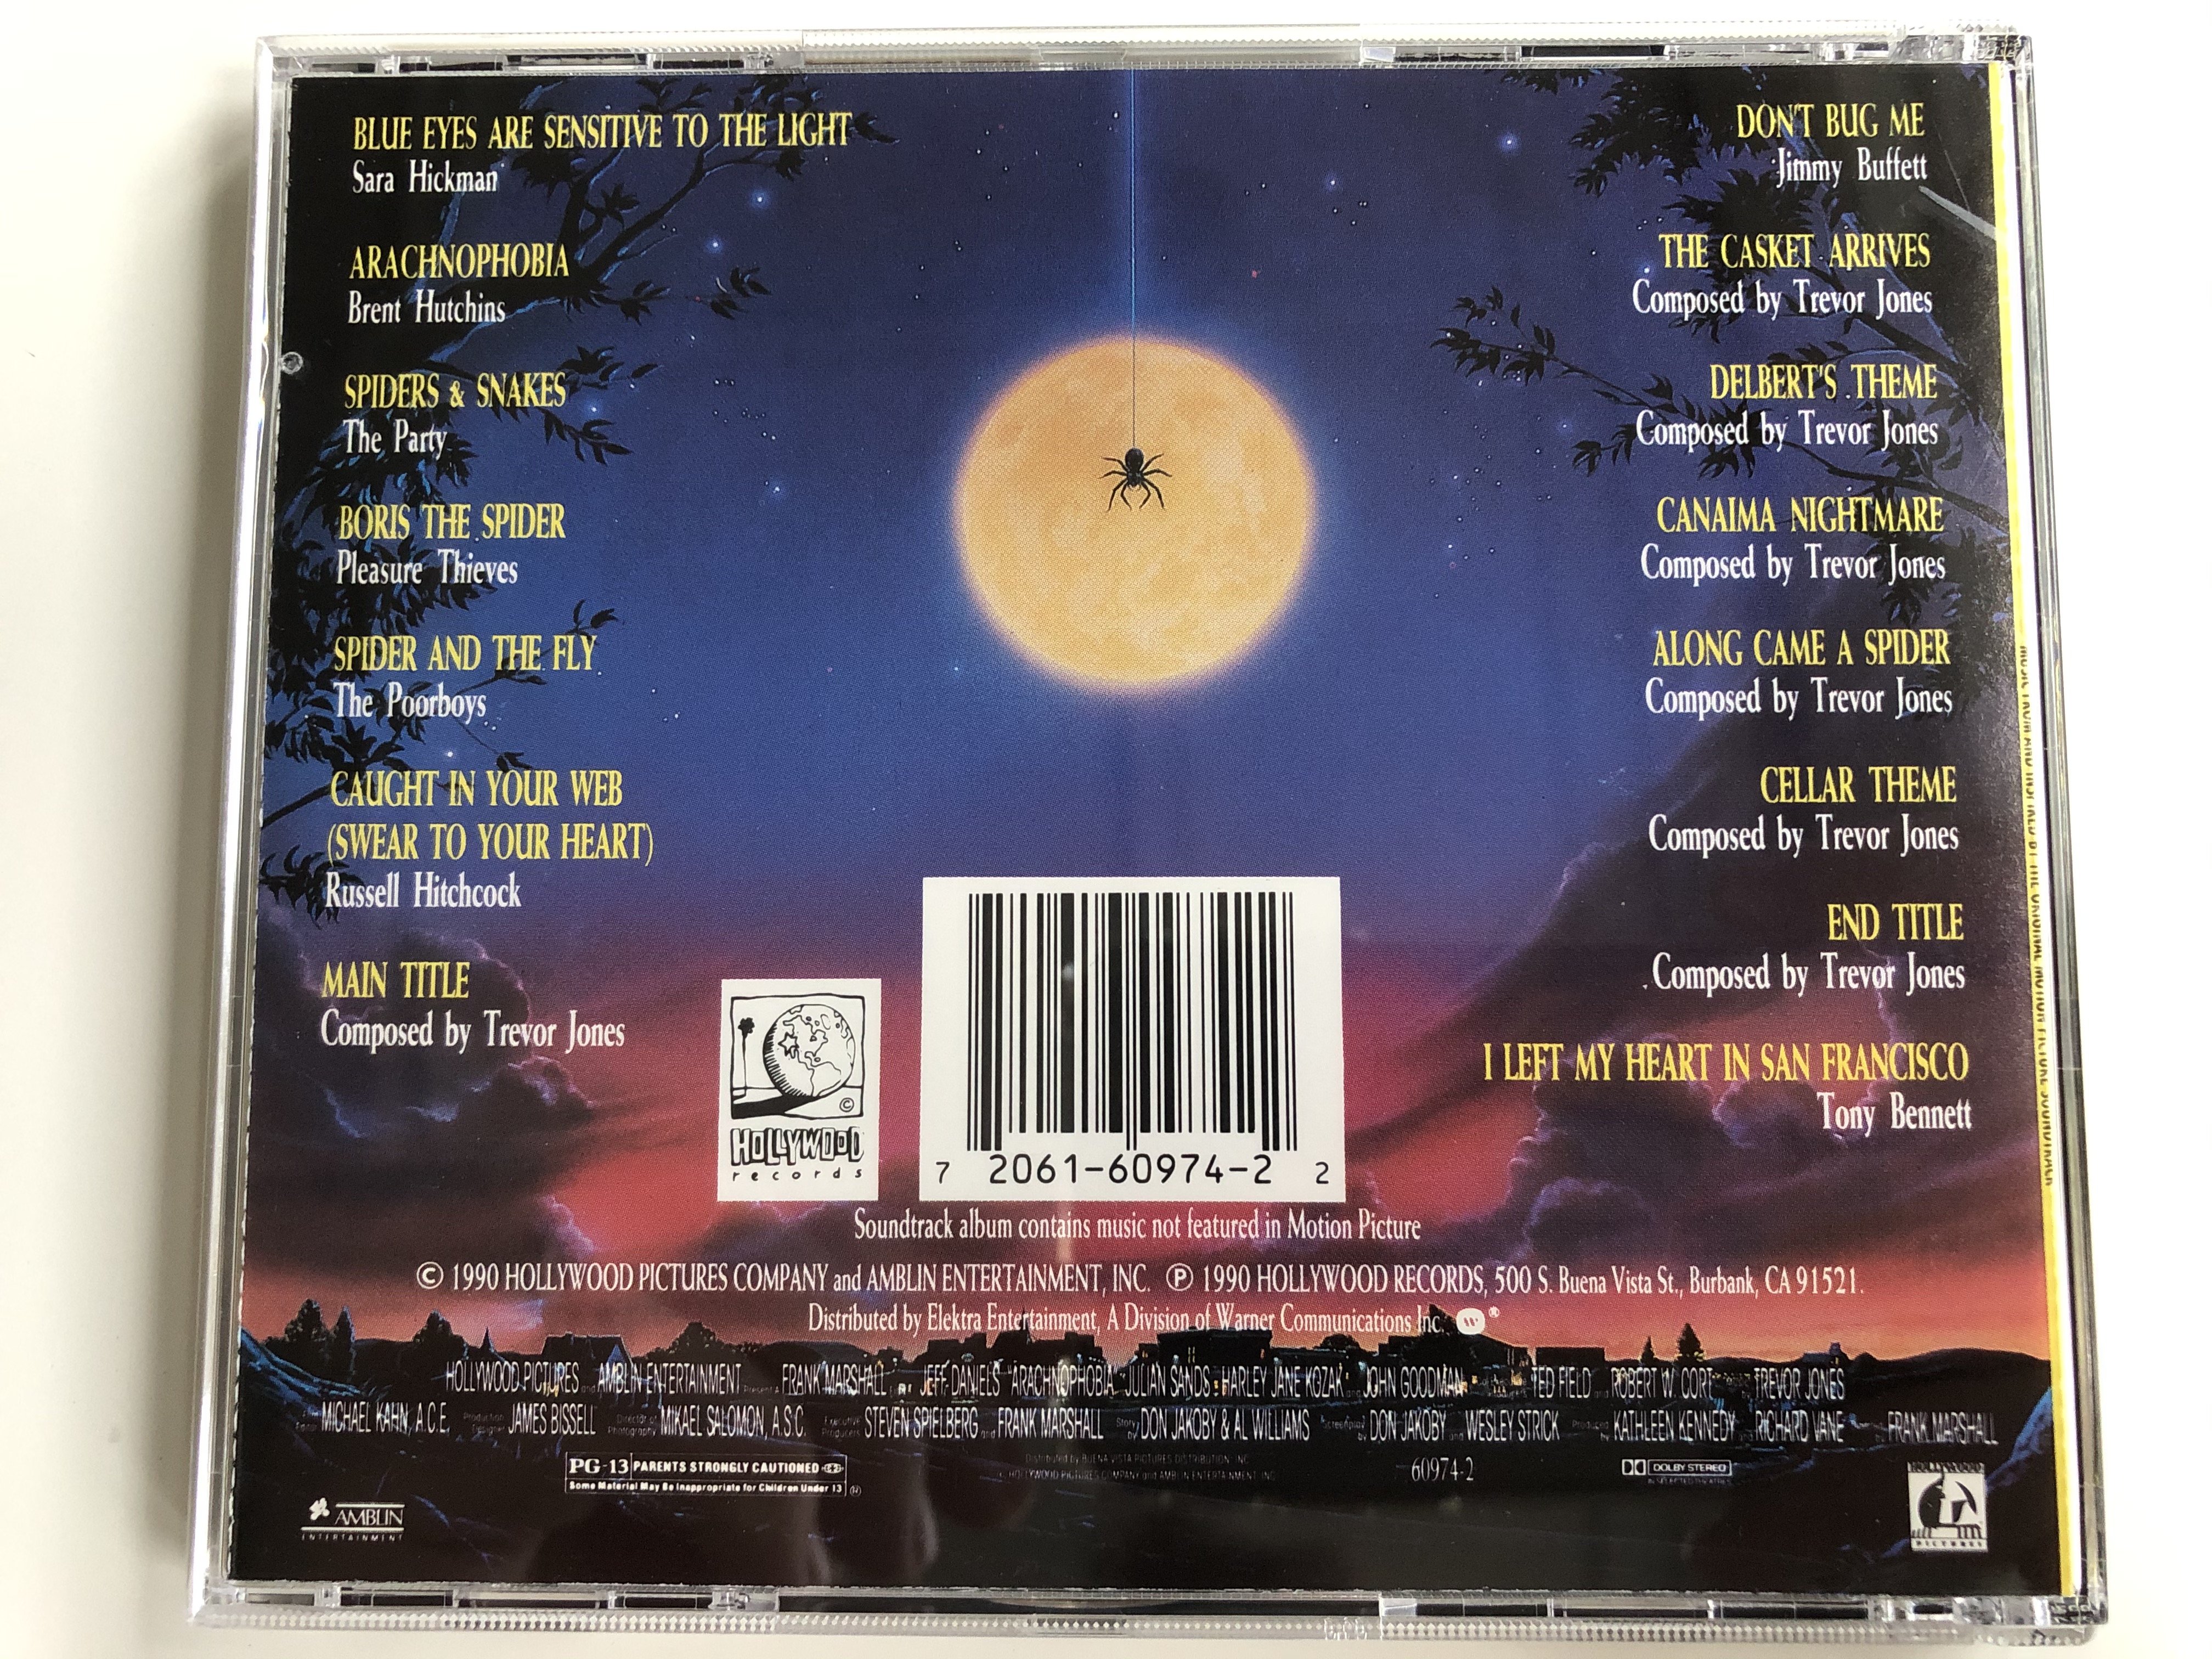 hollywood-pictures-and-amblin-entertainment-presents-arachnophobia-eight-legs-two-fangs-and-an-attitude-hollywood-records-audio-cd-1990-60974-2-4-.jpg